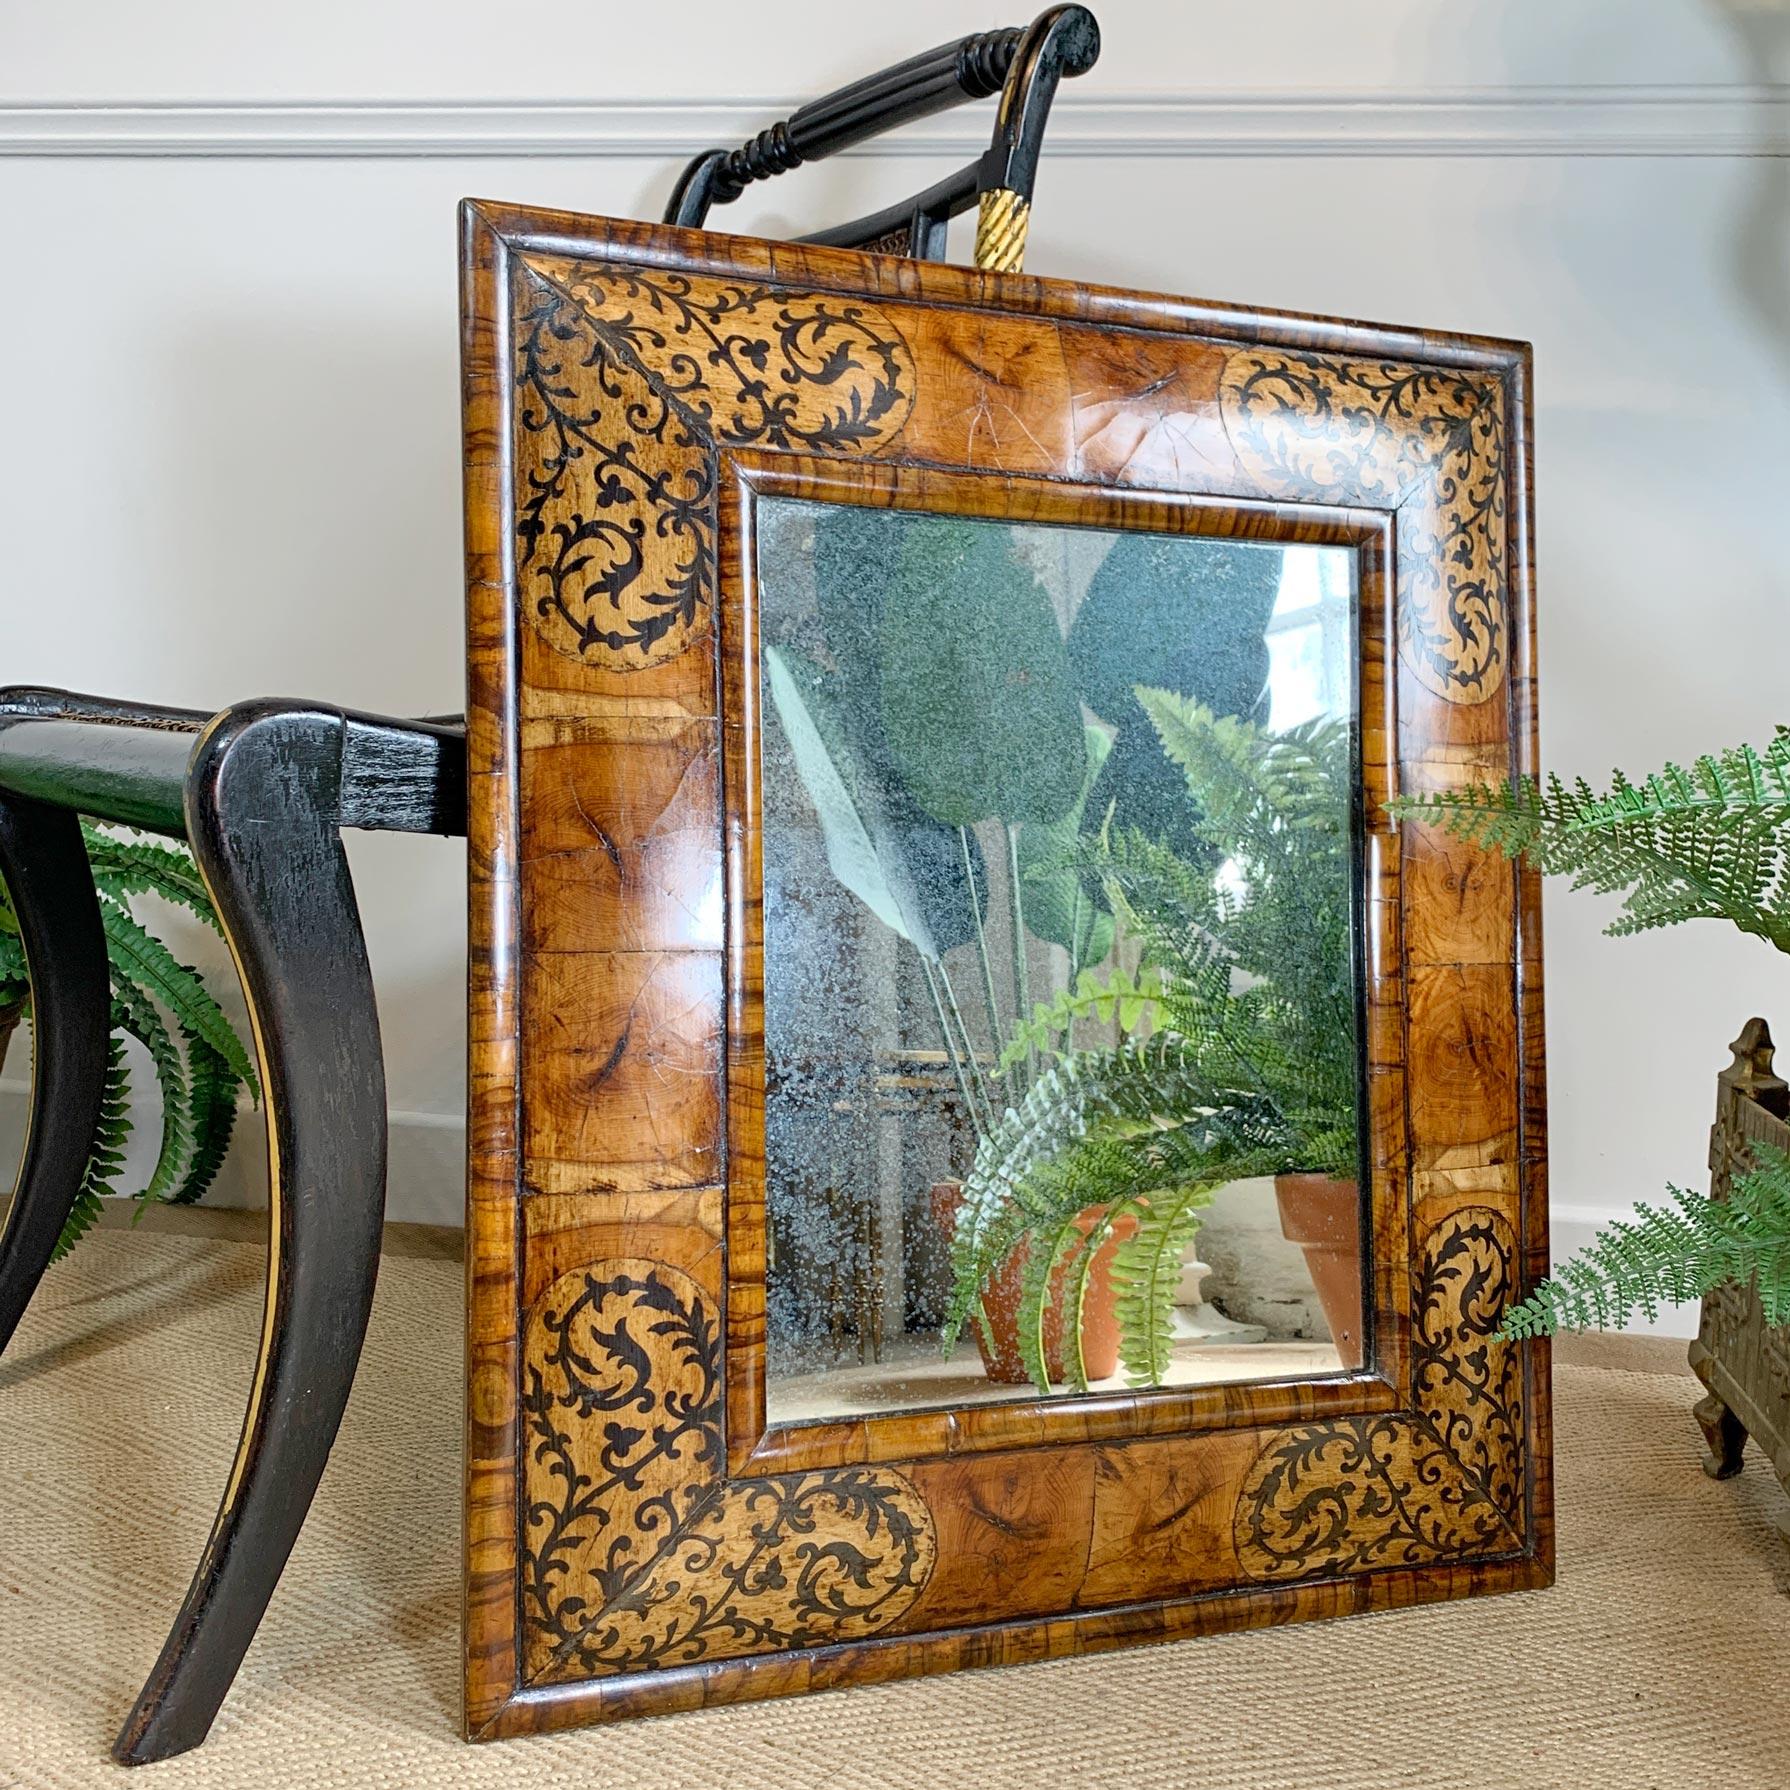 An outstandingly beautiful William and Mary walnut cushion mirror, the deep cushion frame decorated with scrolling flora and fleur de lis marquetry veneer. The frame is complete, with no losses and we believe the foxed mirror plate to be original.